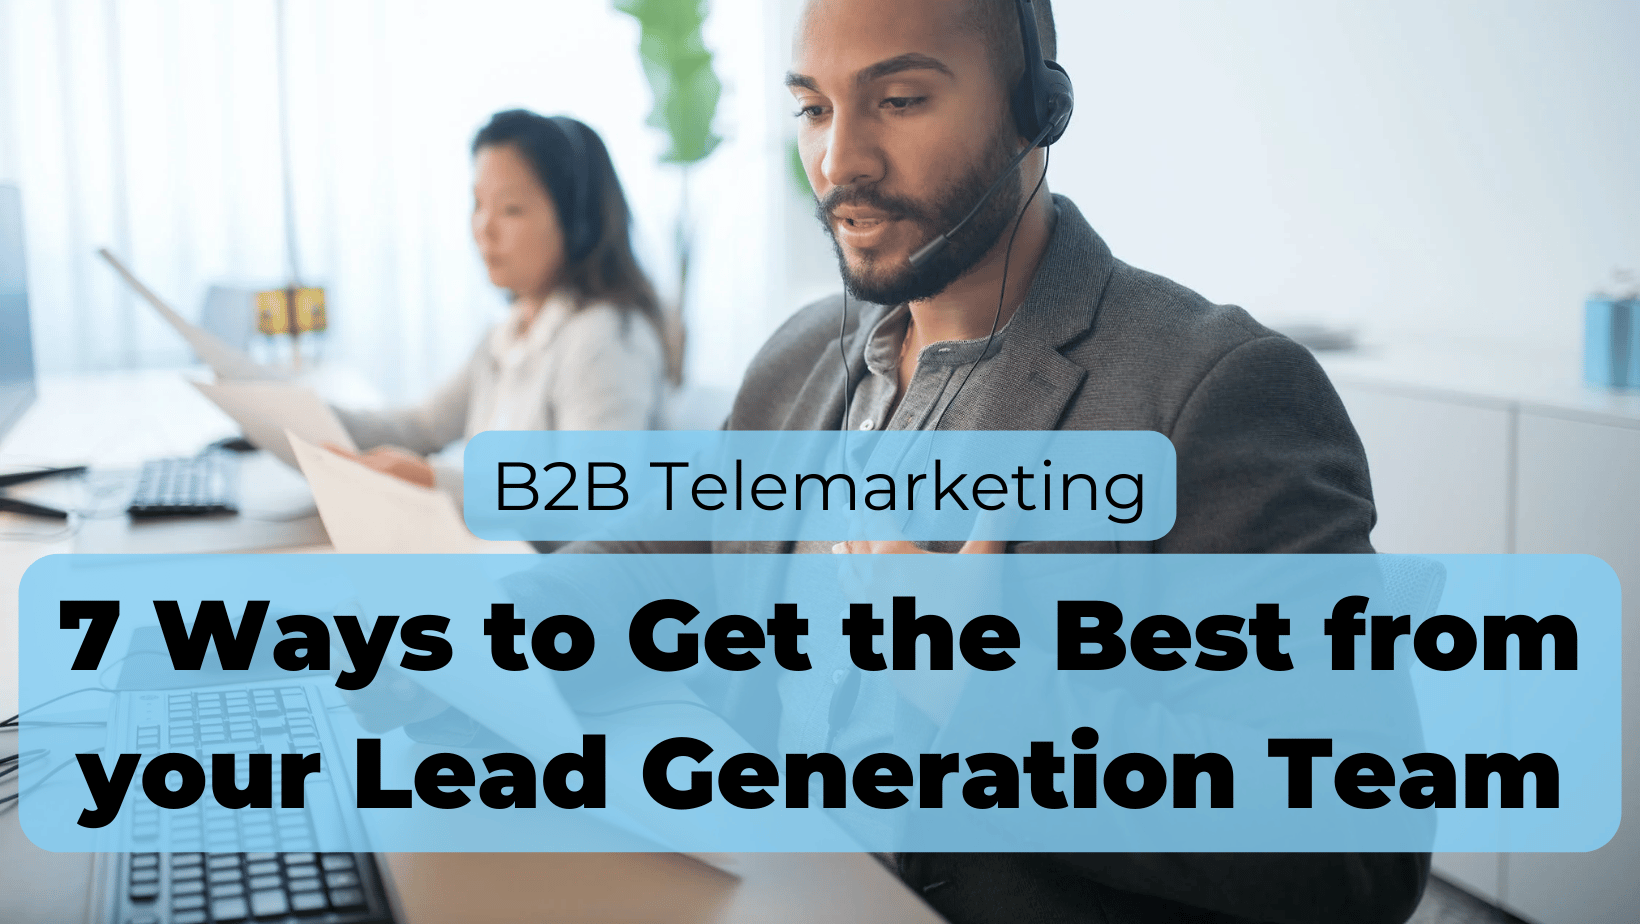 B2B Telemarketing: 7 Ways to Get the Best from your Lead Generation Team